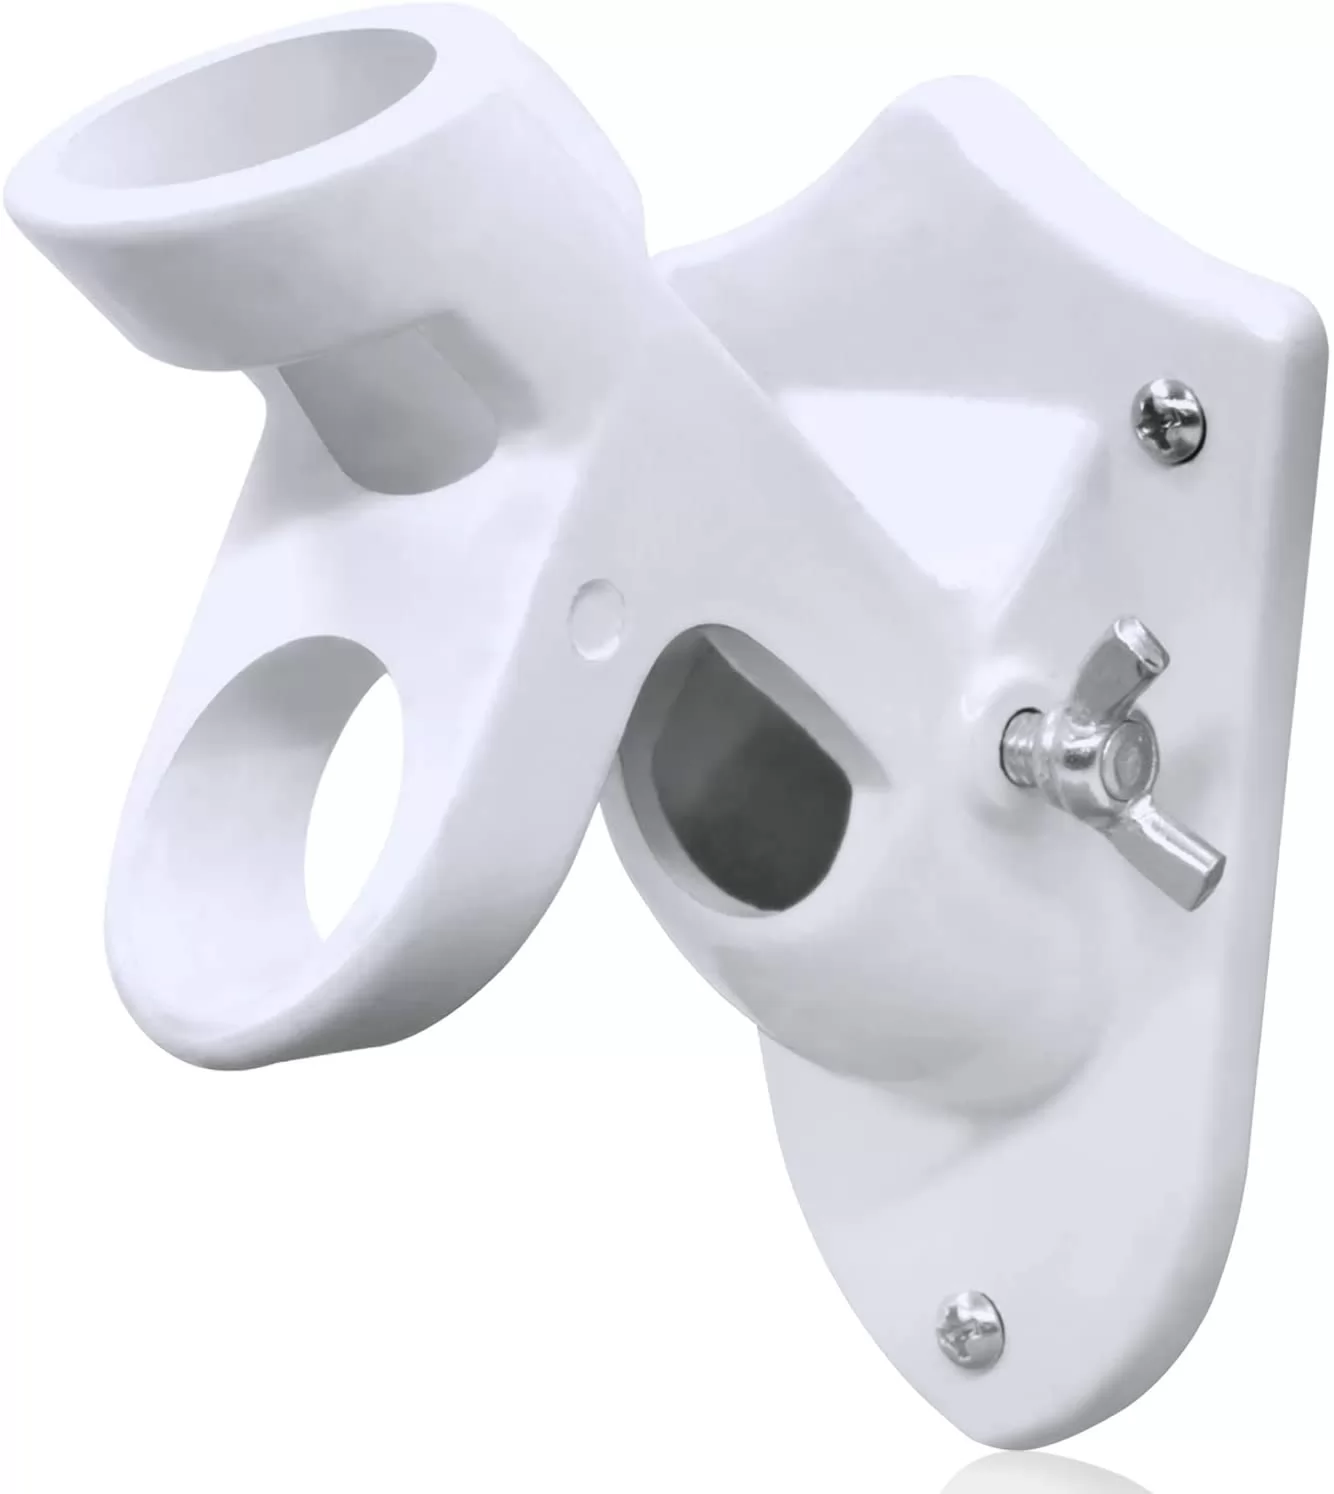 Two-Positions Flag Pole Holder Mounting Bracket with Hardware - Made of Aluminum Strong and Rust Free Coated 1" Inner Diameter (White)